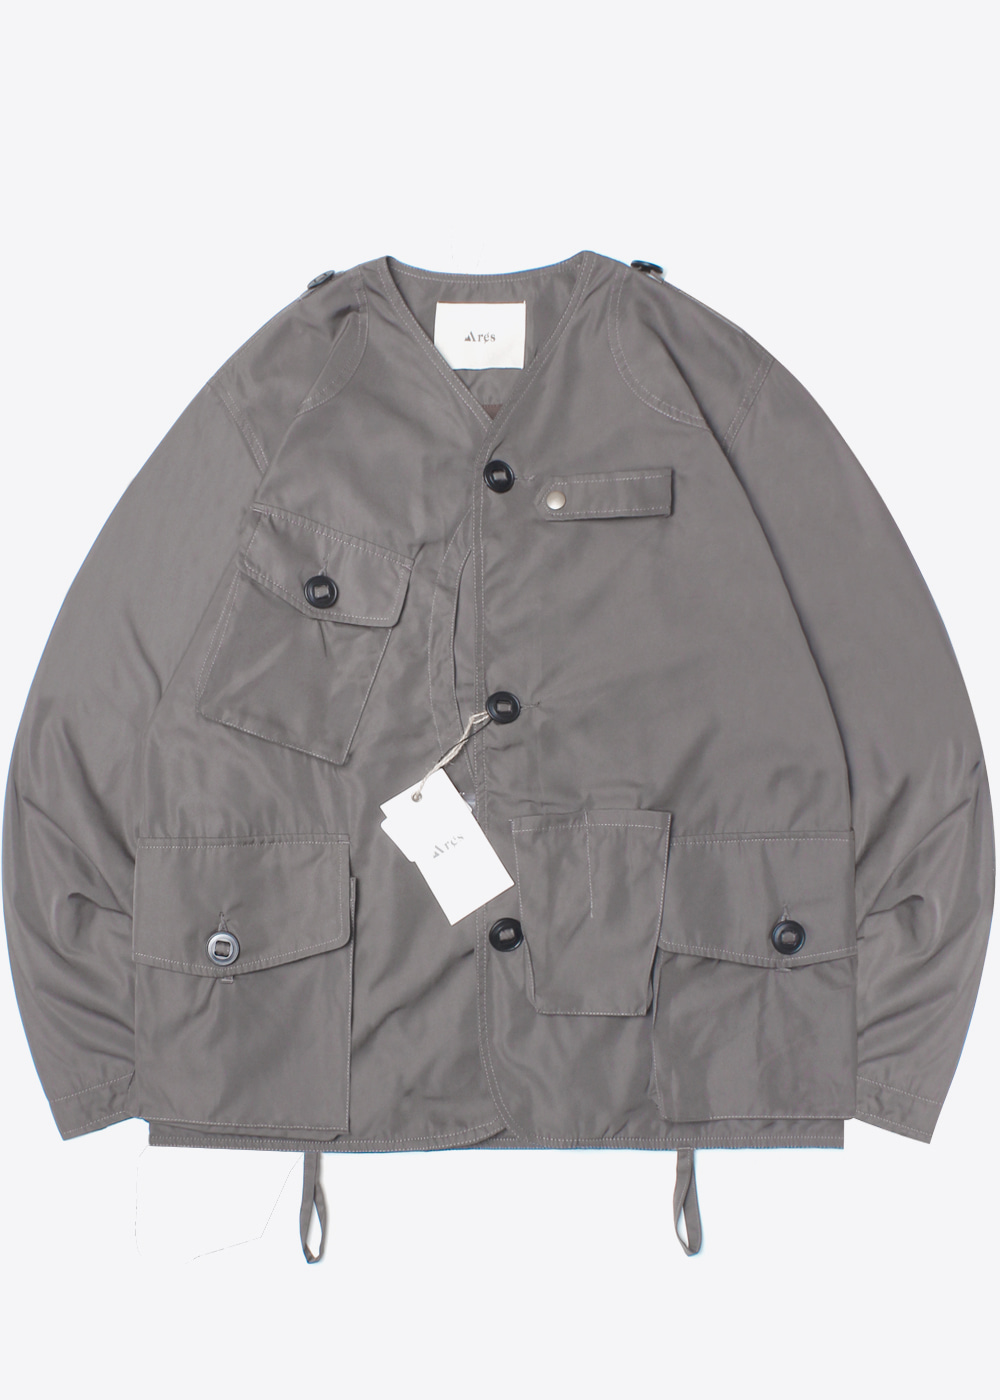 ARES’over fit’ poly hunting jacket